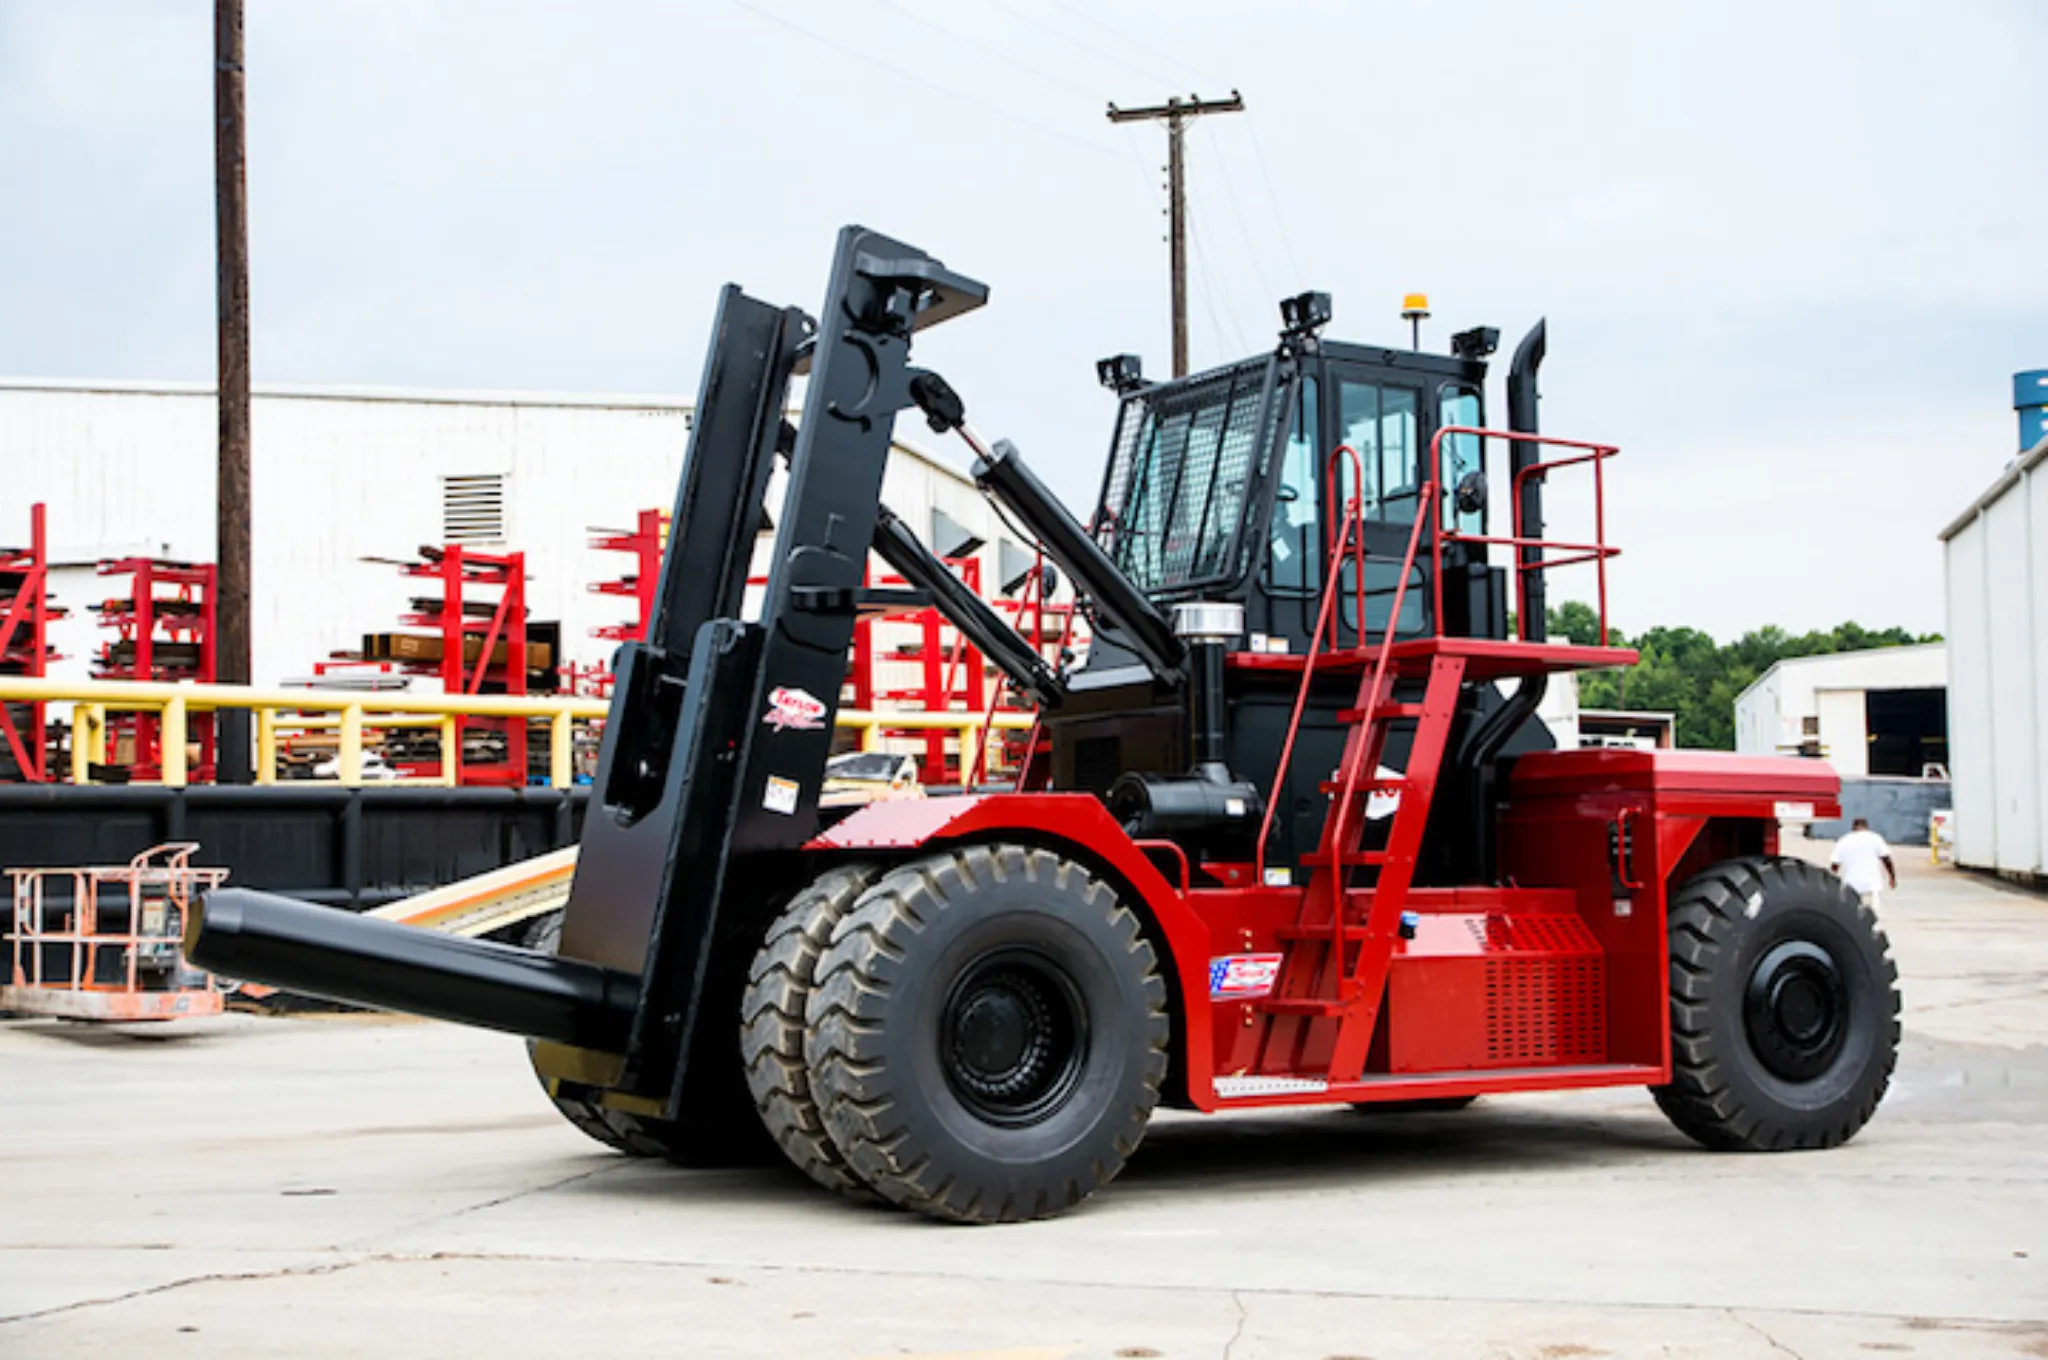 Taylor X-800S High Capacity Forklift